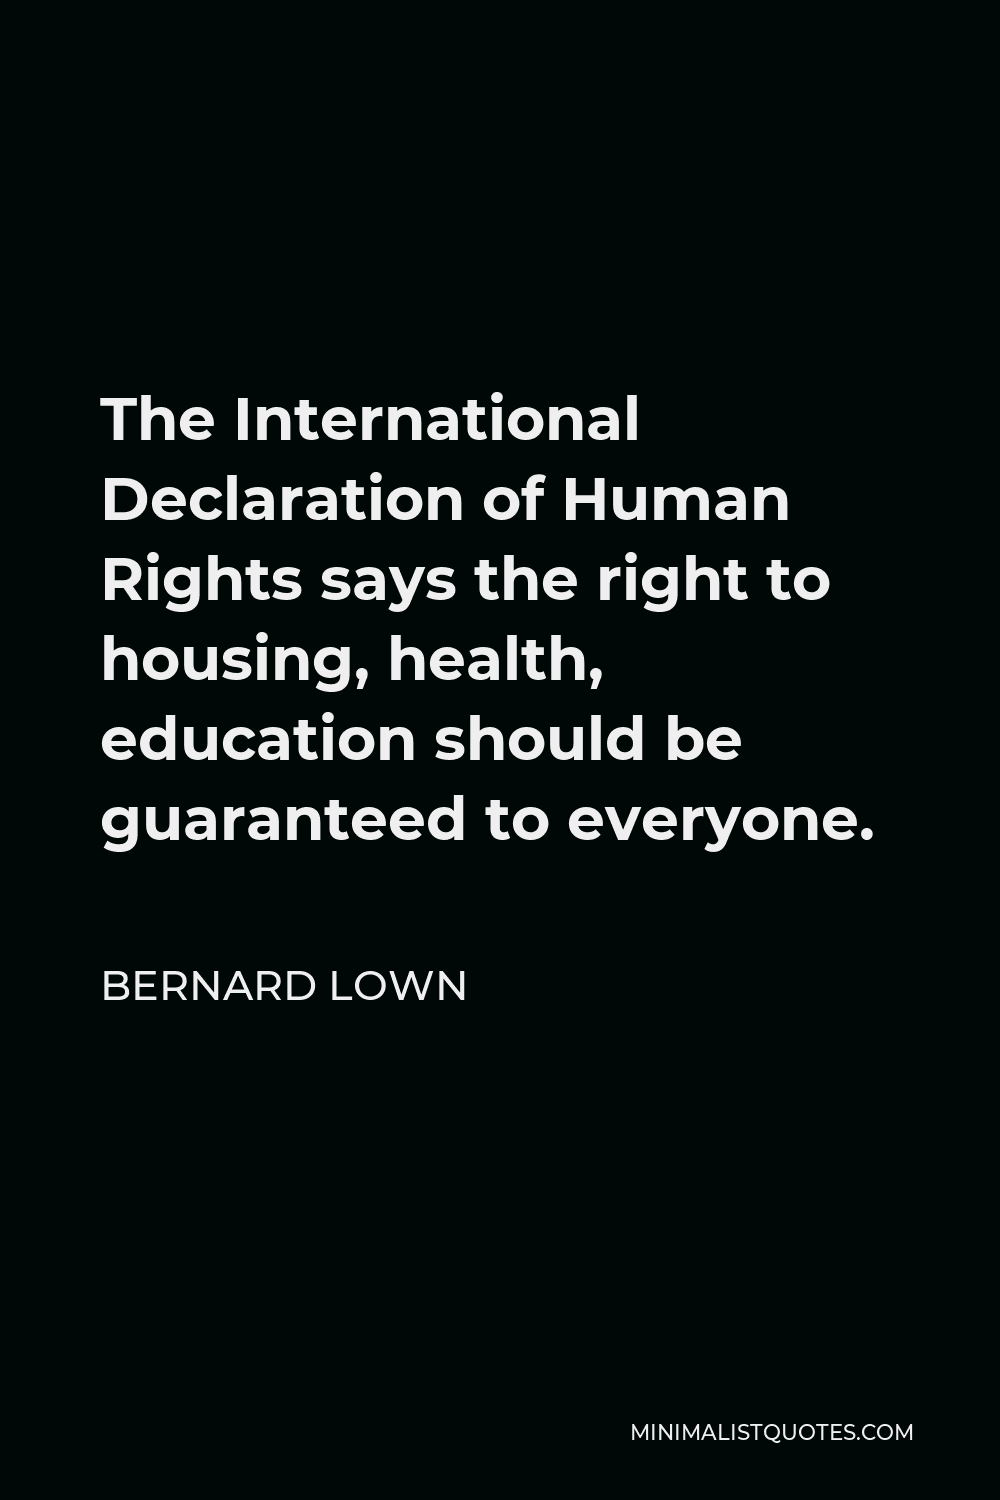 Bernard Lown Quote - The International Declaration of Human Rights says the right to housing, health, education should be guaranteed to everyone.